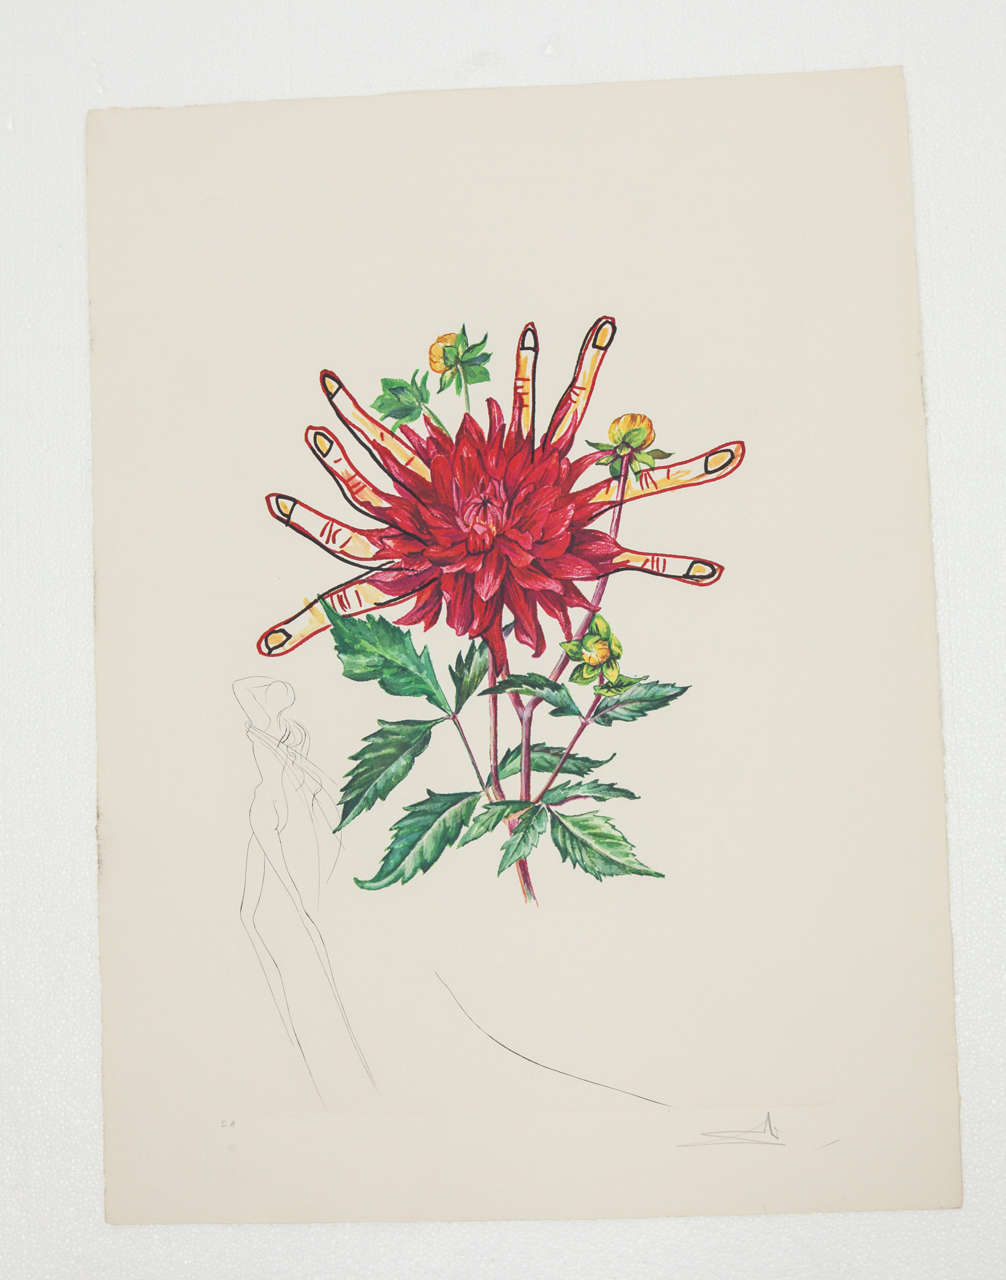 Signed Salvador Dali print, lithograph with original engraving, published in 1972 by Editions Graphiques Internationales. Image is derived from 19th century flower engraving which Dali surrealized in his own way. 
On Arches watermarked paper,